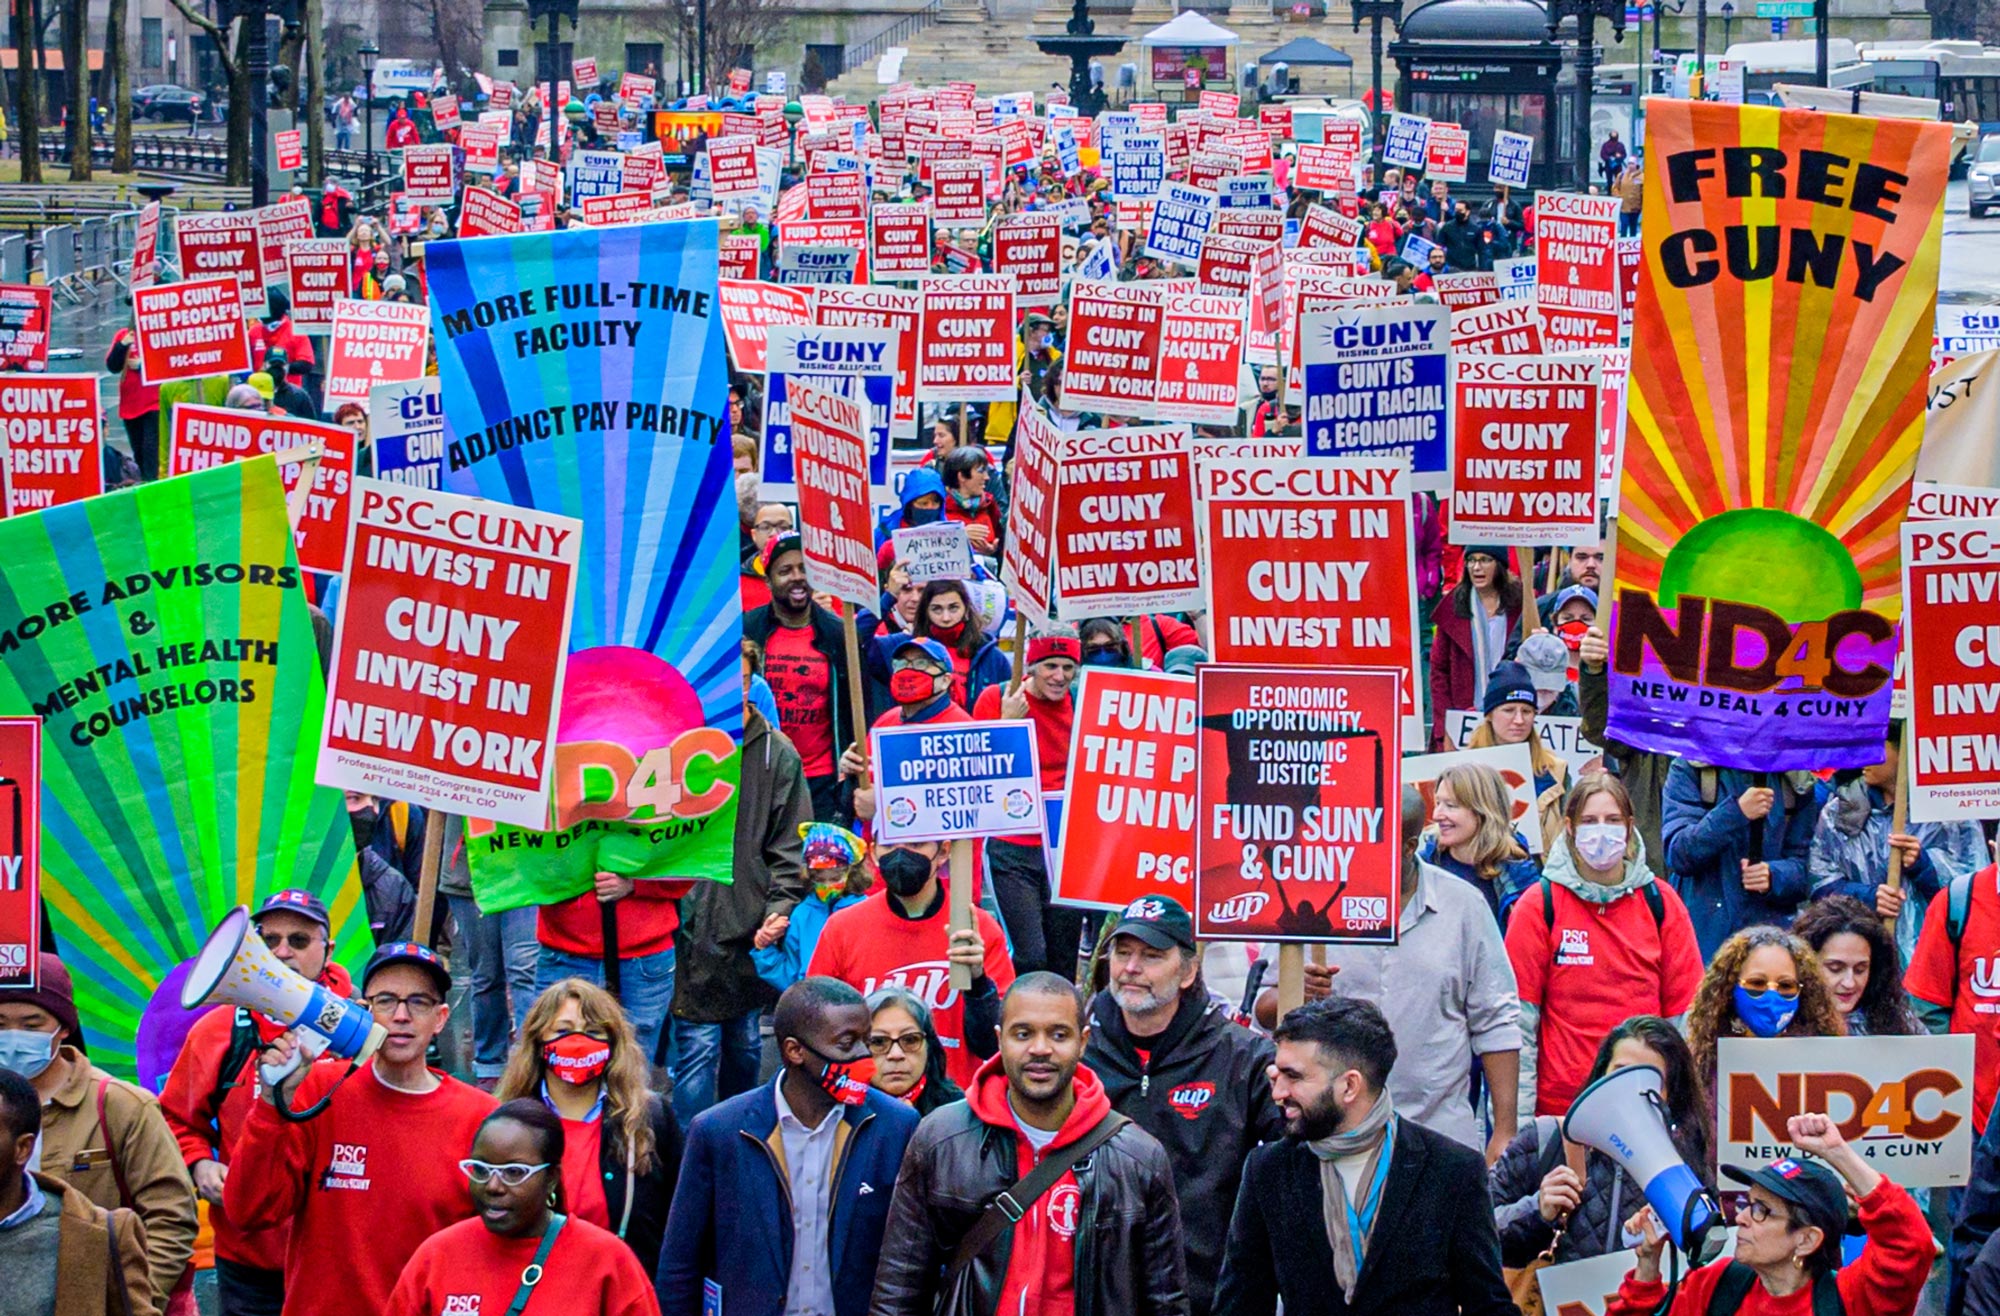 In March, PSC and CUNY Rising join forces with the United University Professions (the SUNY faculty and staff union) to lead hundreds across the Brooklyn Bridge to demand full funding for public higher education. (Credit: Erik McGregor)